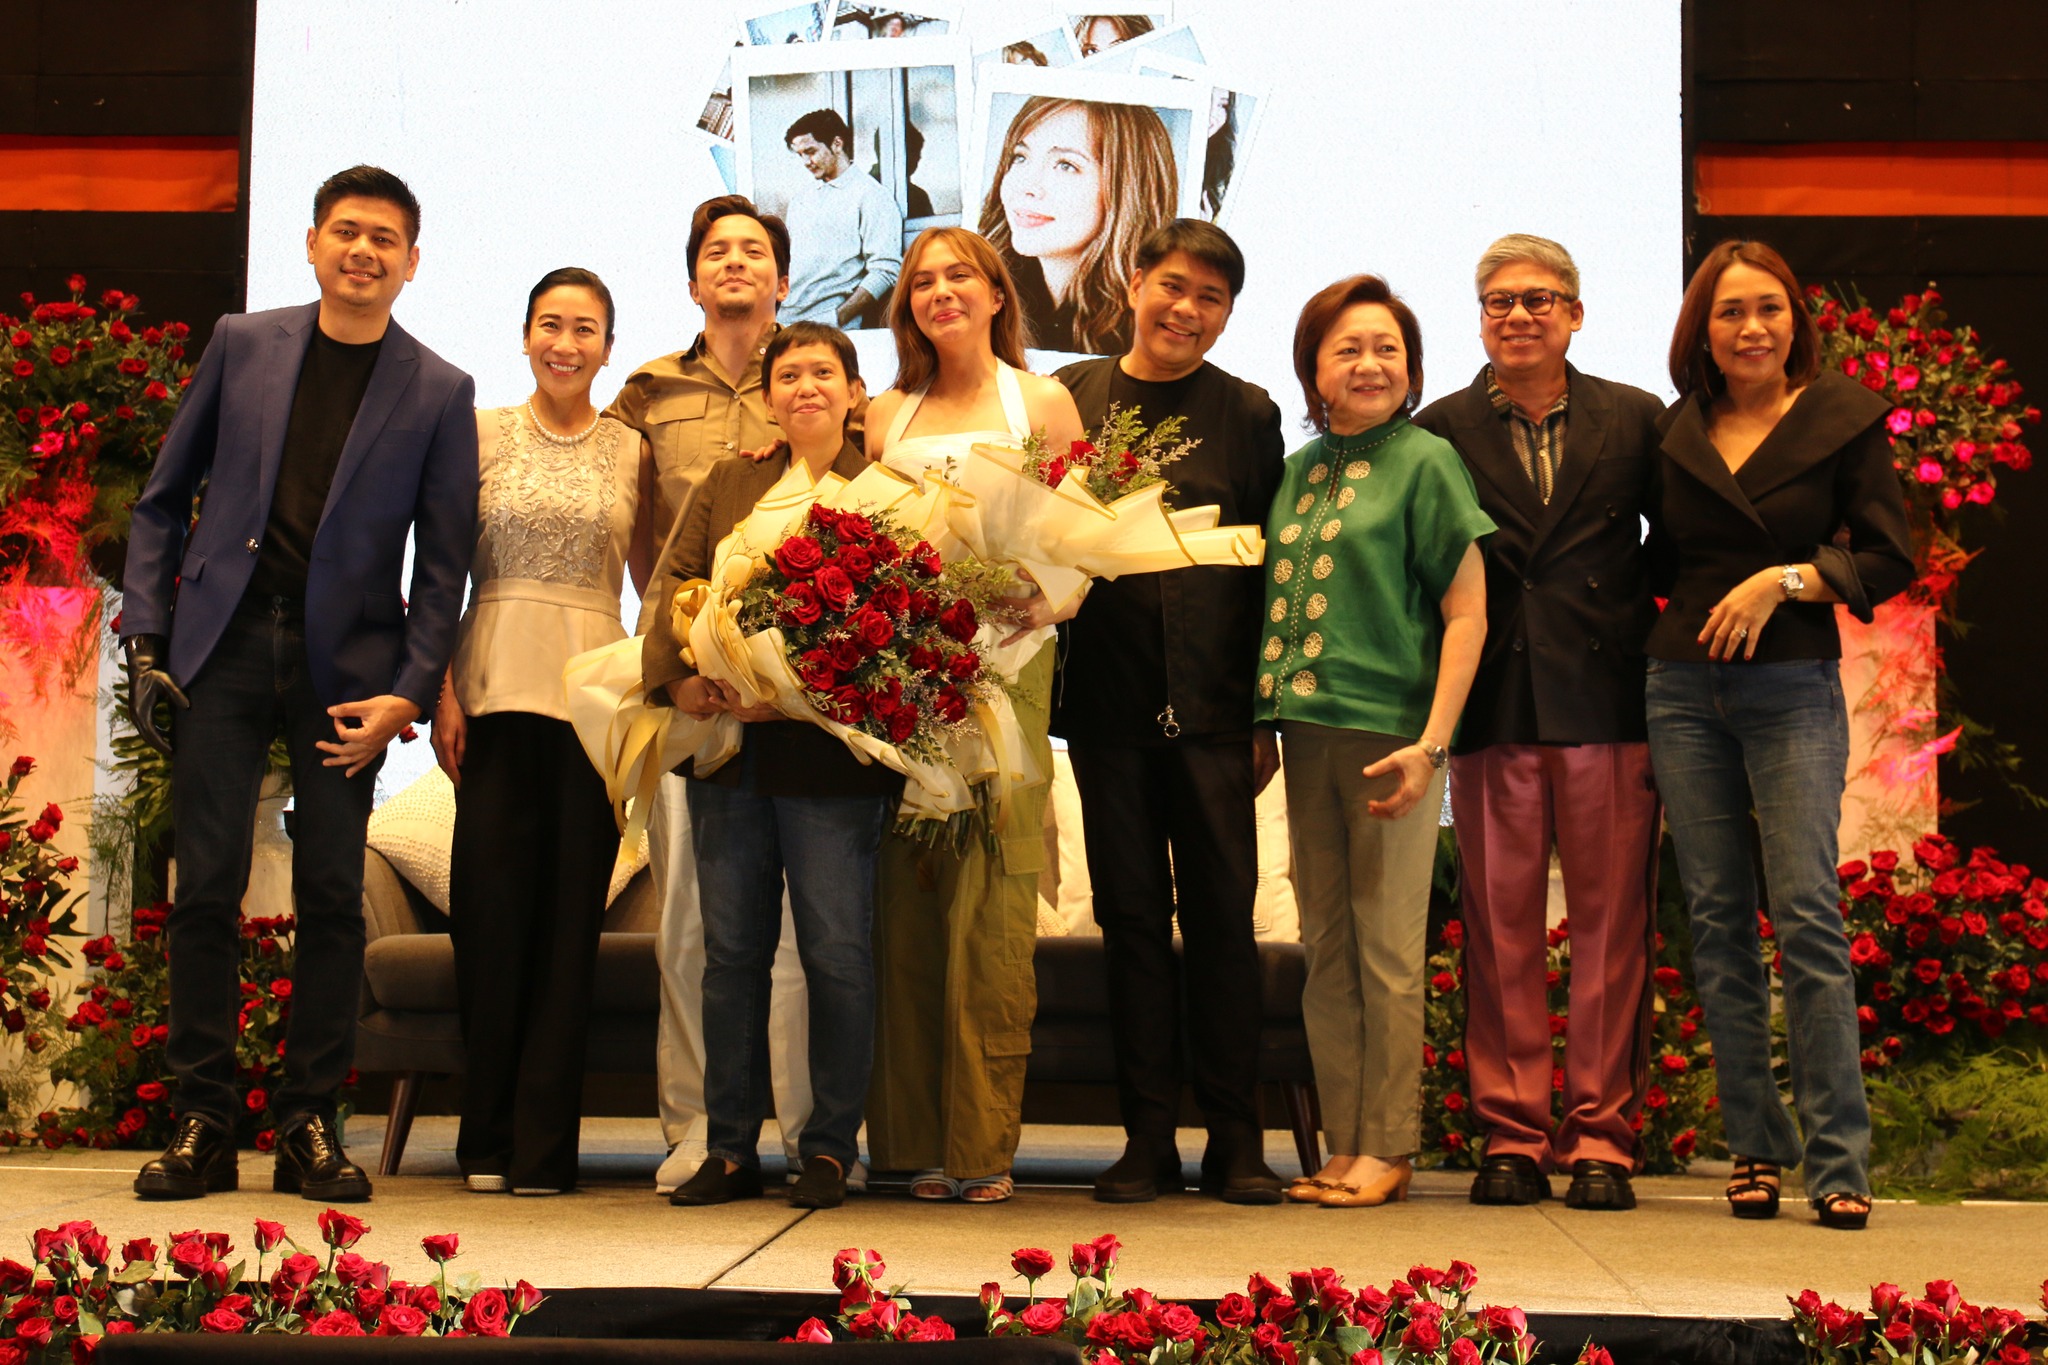 Cast and team behind'Five Break-Ups and a Romance'